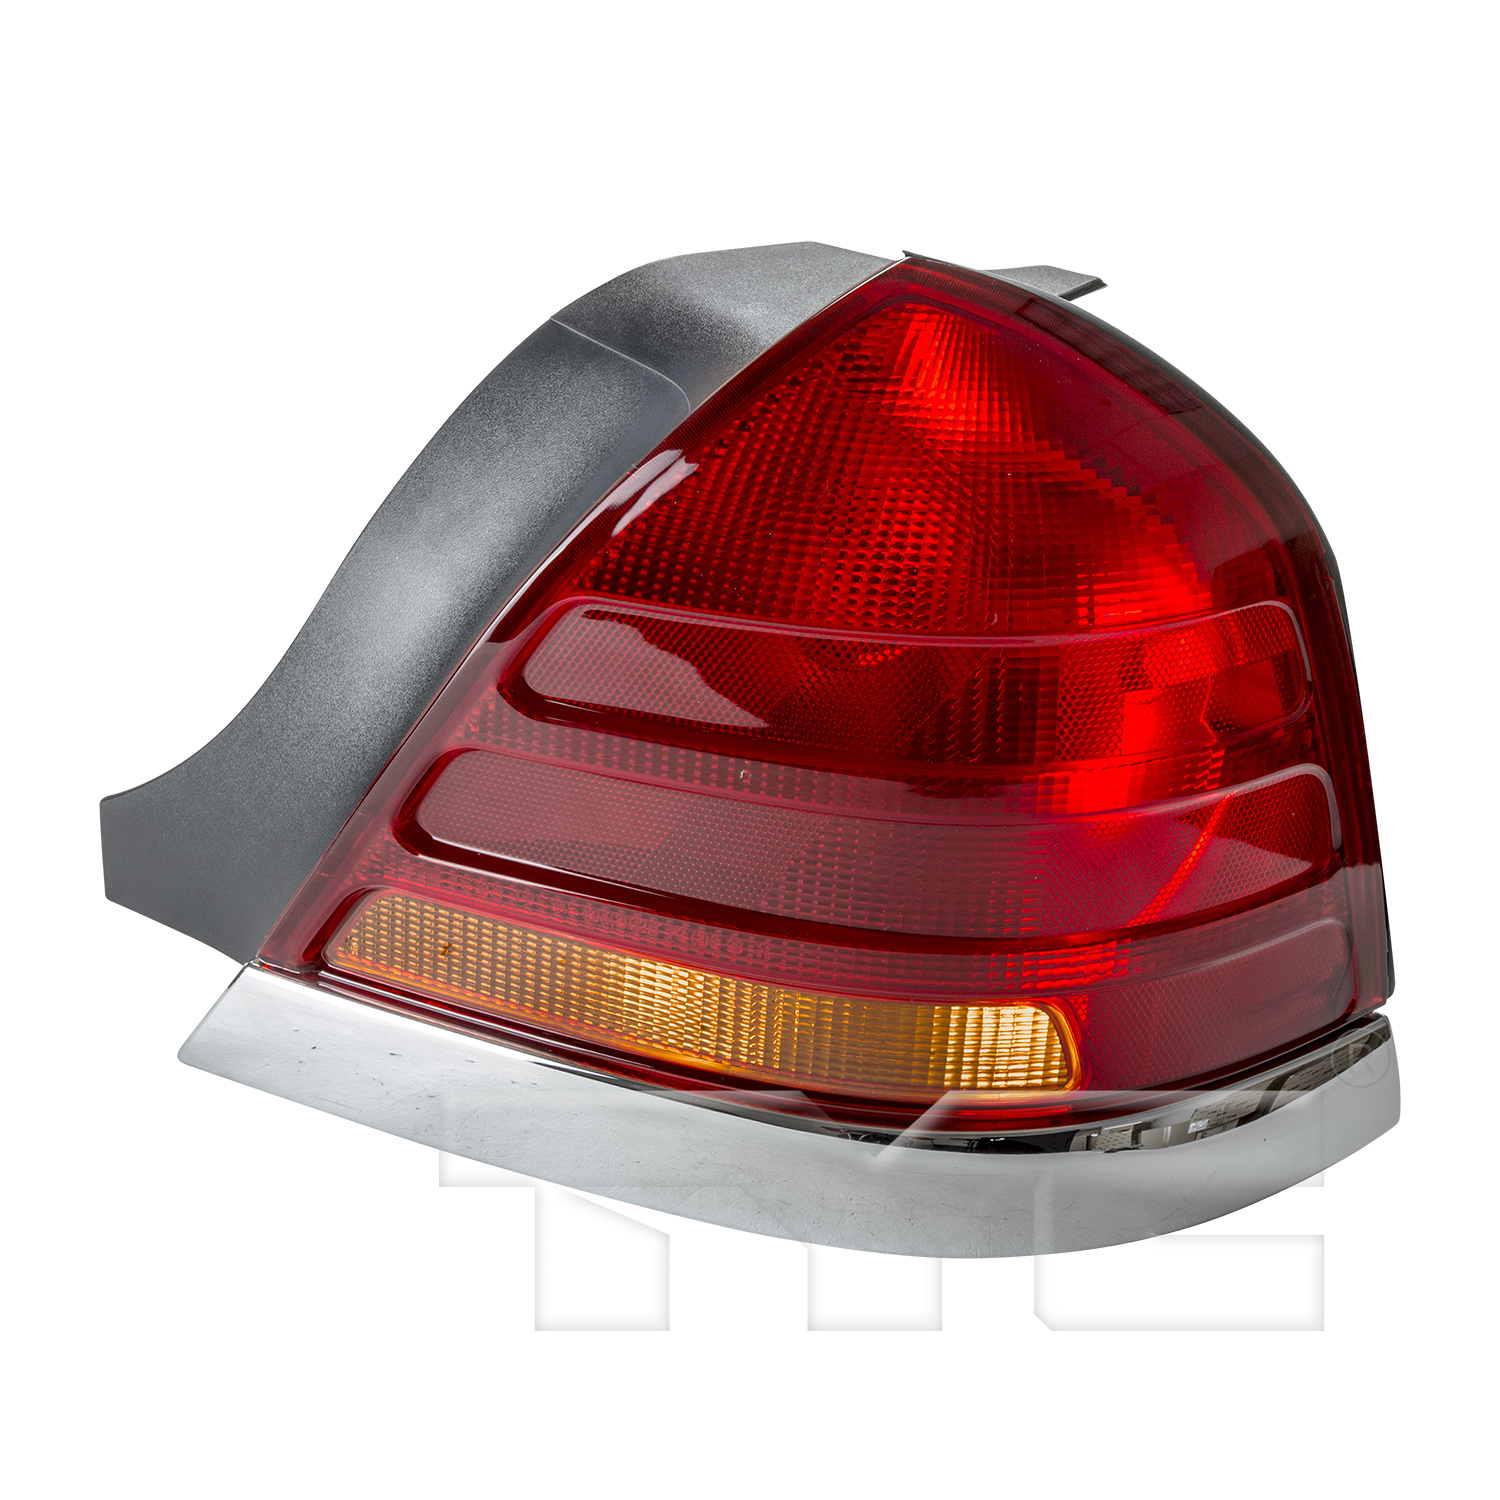 Aftermarket TAILLIGHTS for FORD - CROWN VICTORIA, CROWN VICTORIA,98-98,RT Taillamp assy